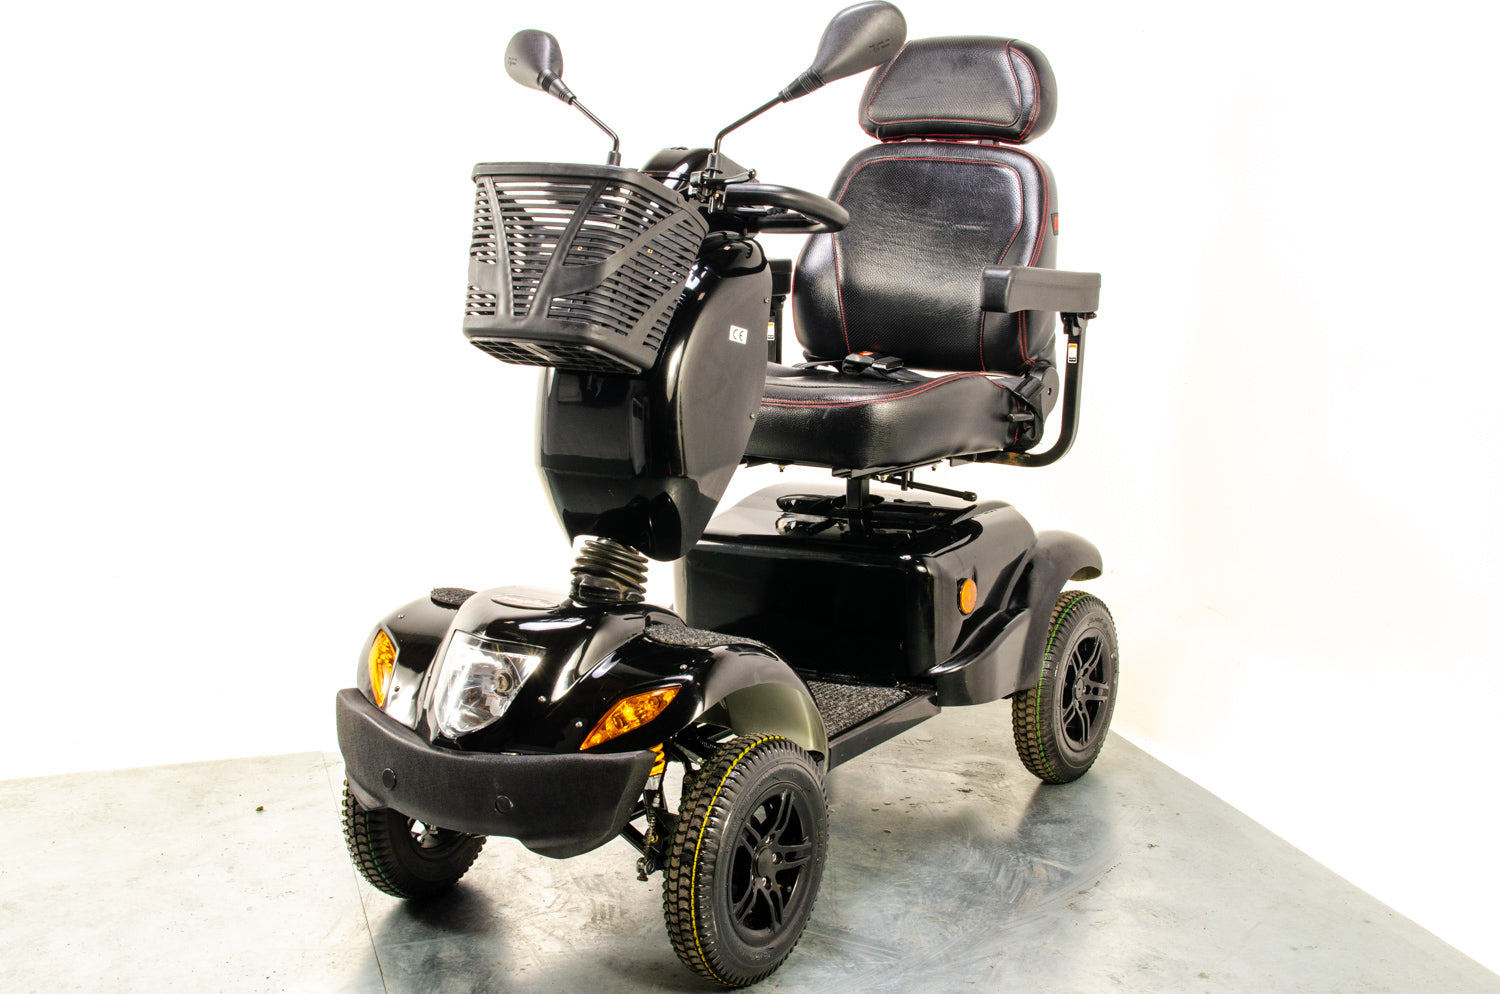 Freerider Landranger XL8 8mph Used Mobility Scooter All-Terrain Off-Road Road Legal Large 13275